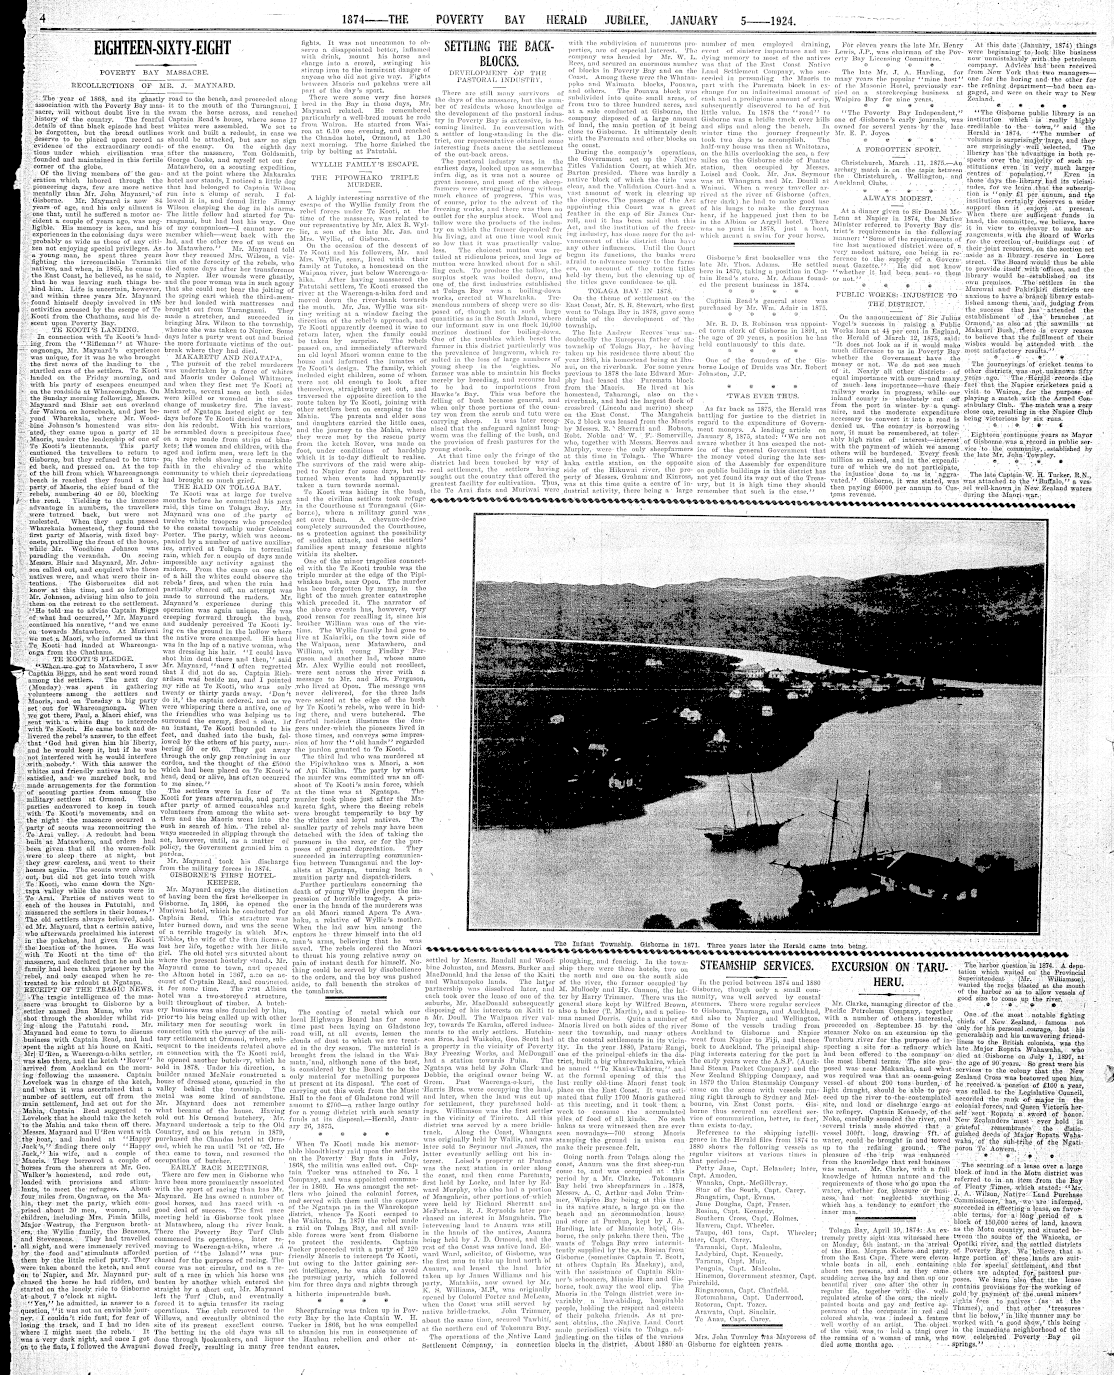 Papers Past | Newspapers | Poverty Bay Herald | 5 January 1924 | Page 4 ...